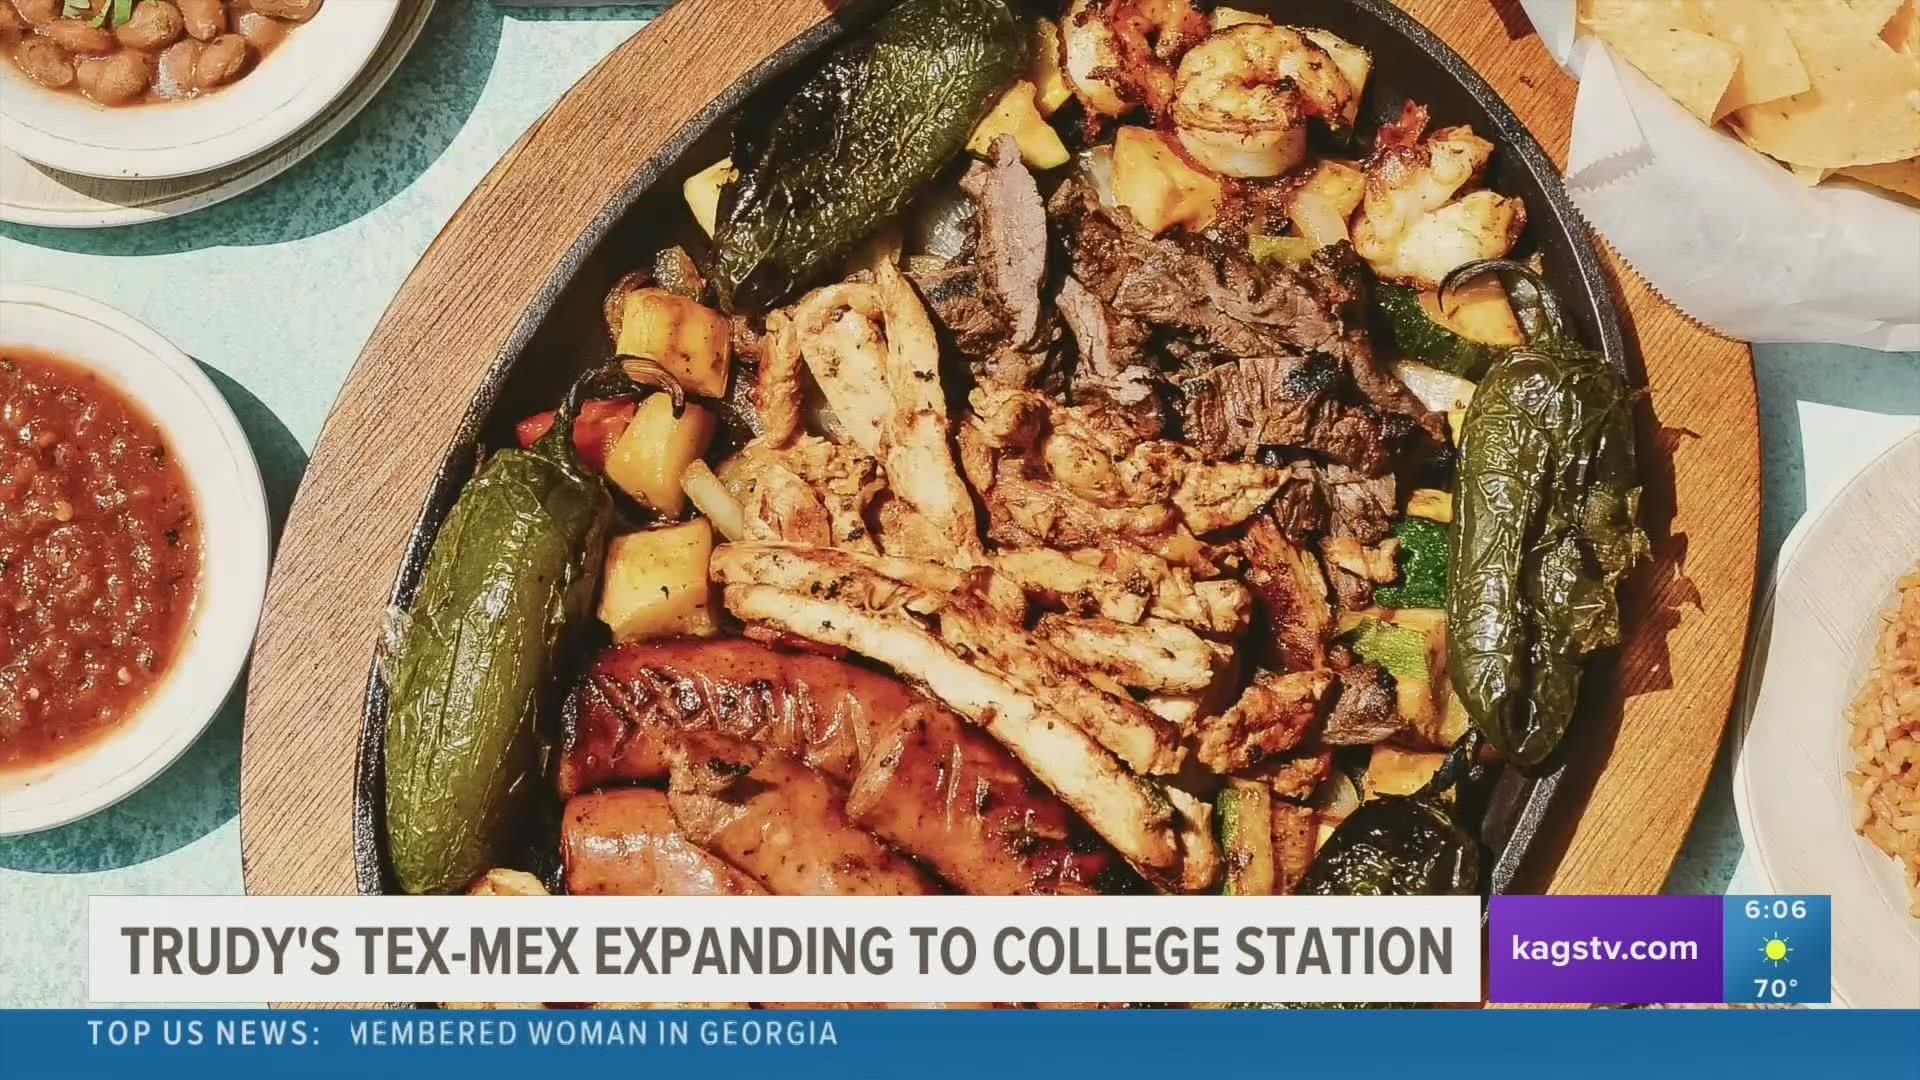 The Austin-based restaurant company will open its first location on University Drive in College Station in spring 2023.